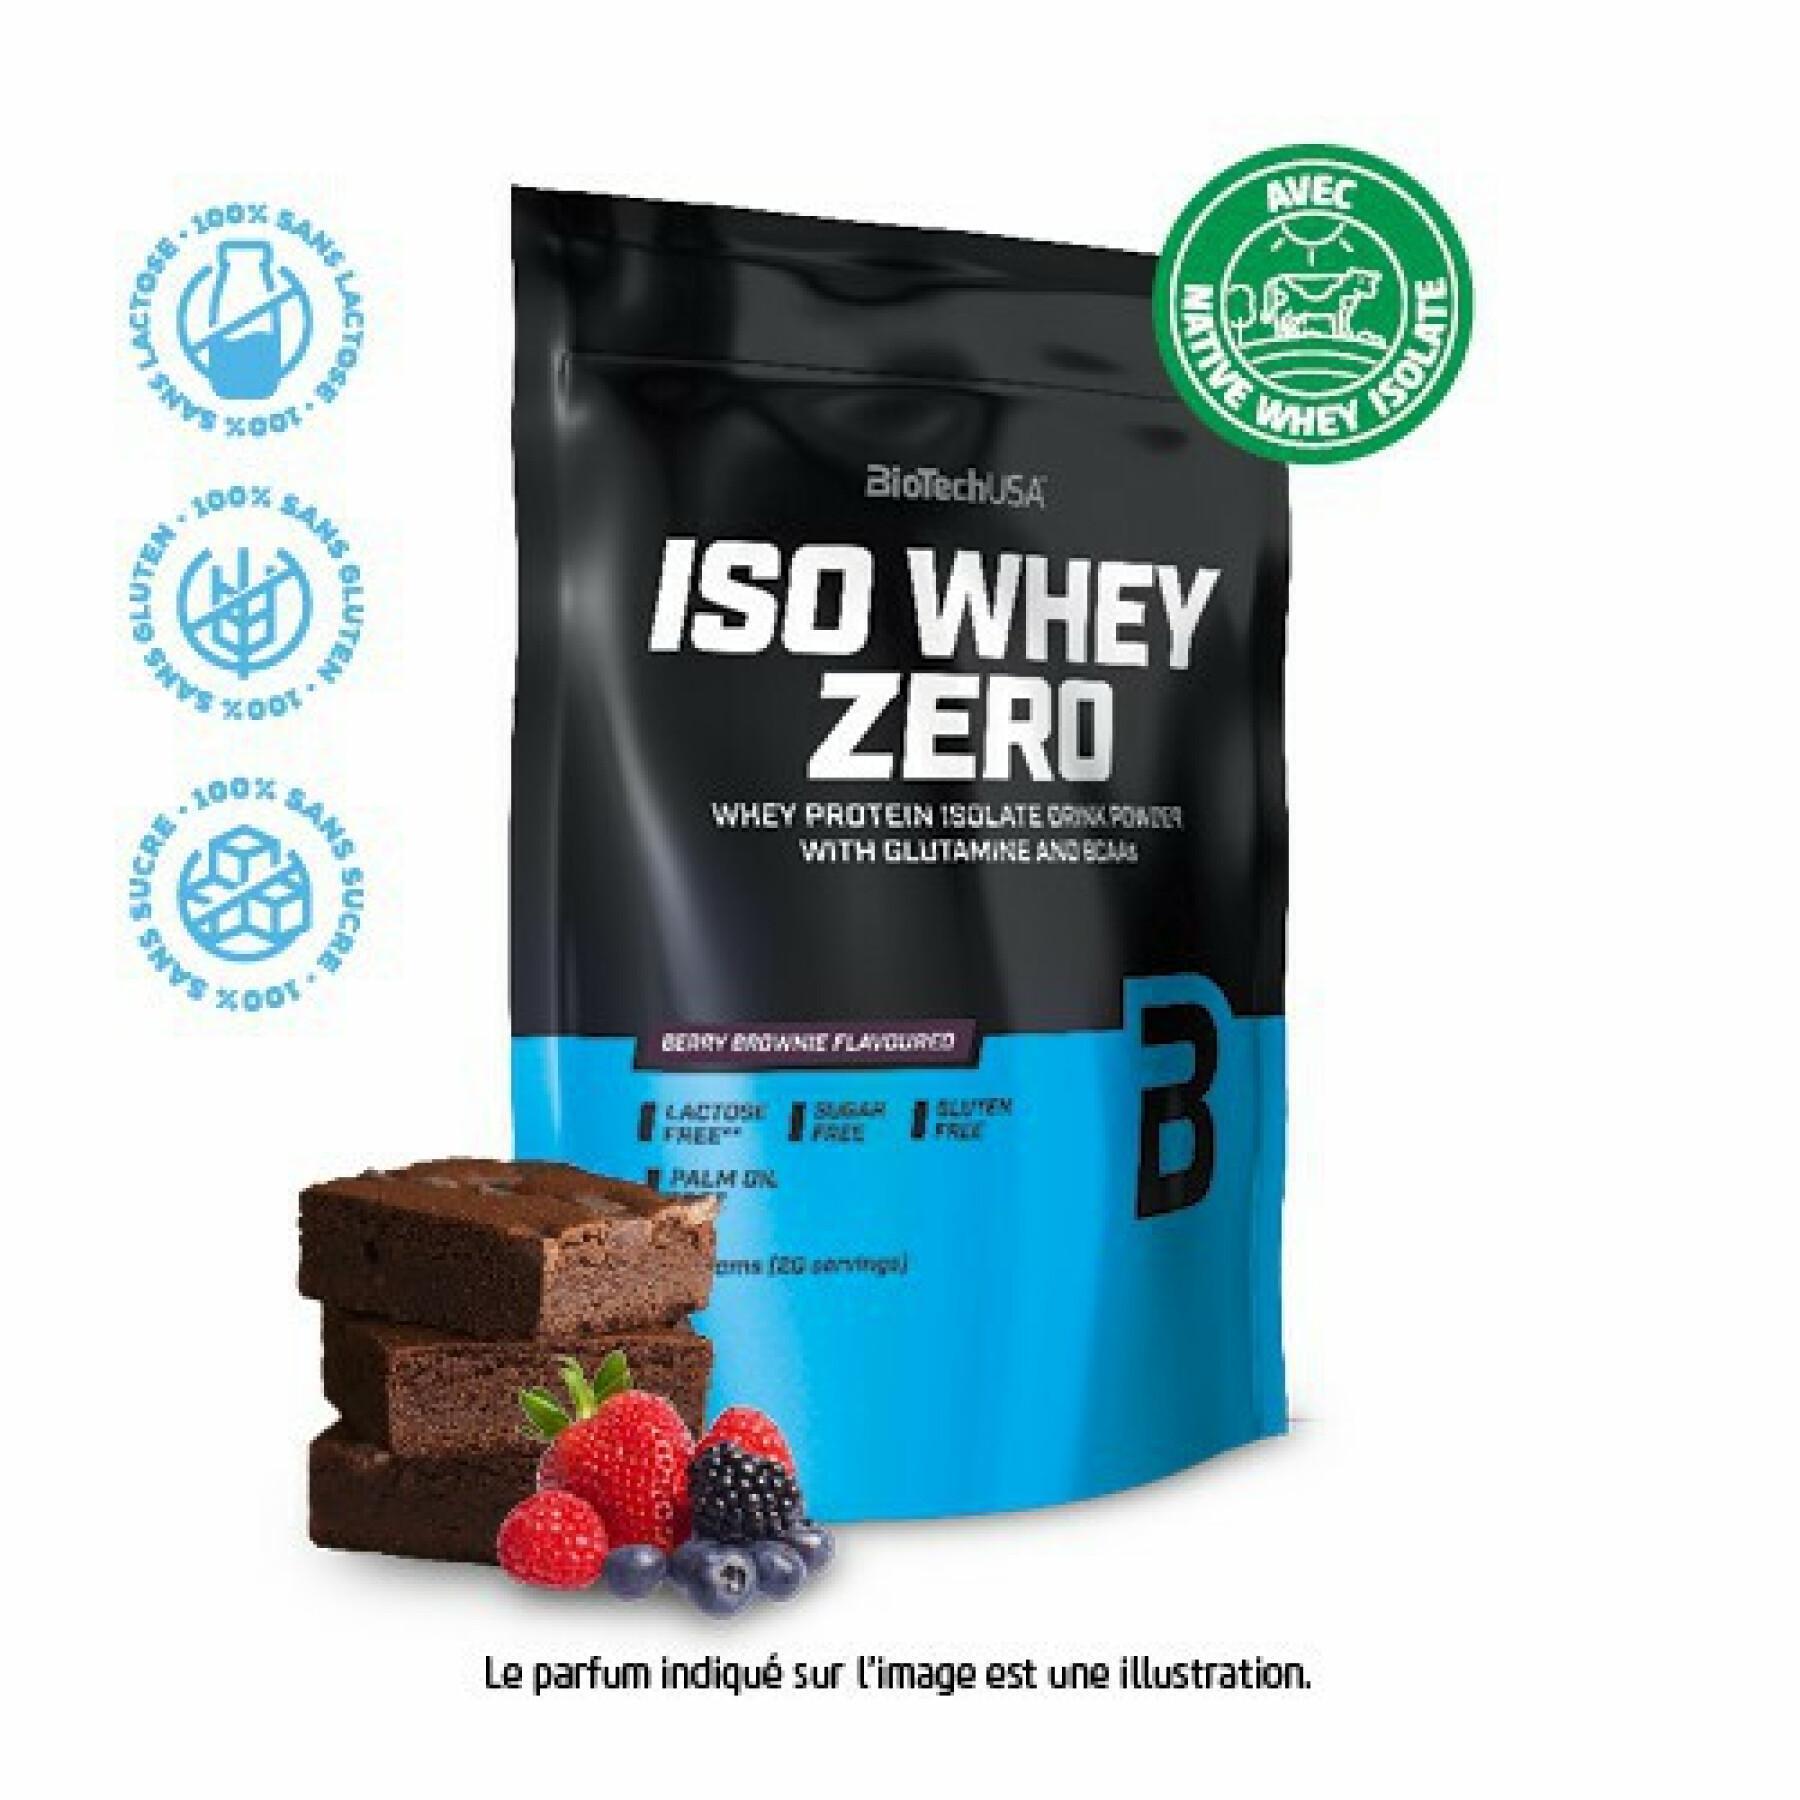 Förpackning med 10 proteinpåsar Biotech USA iso whey zero lactose free - Brownie aux fruits rouges - 500g